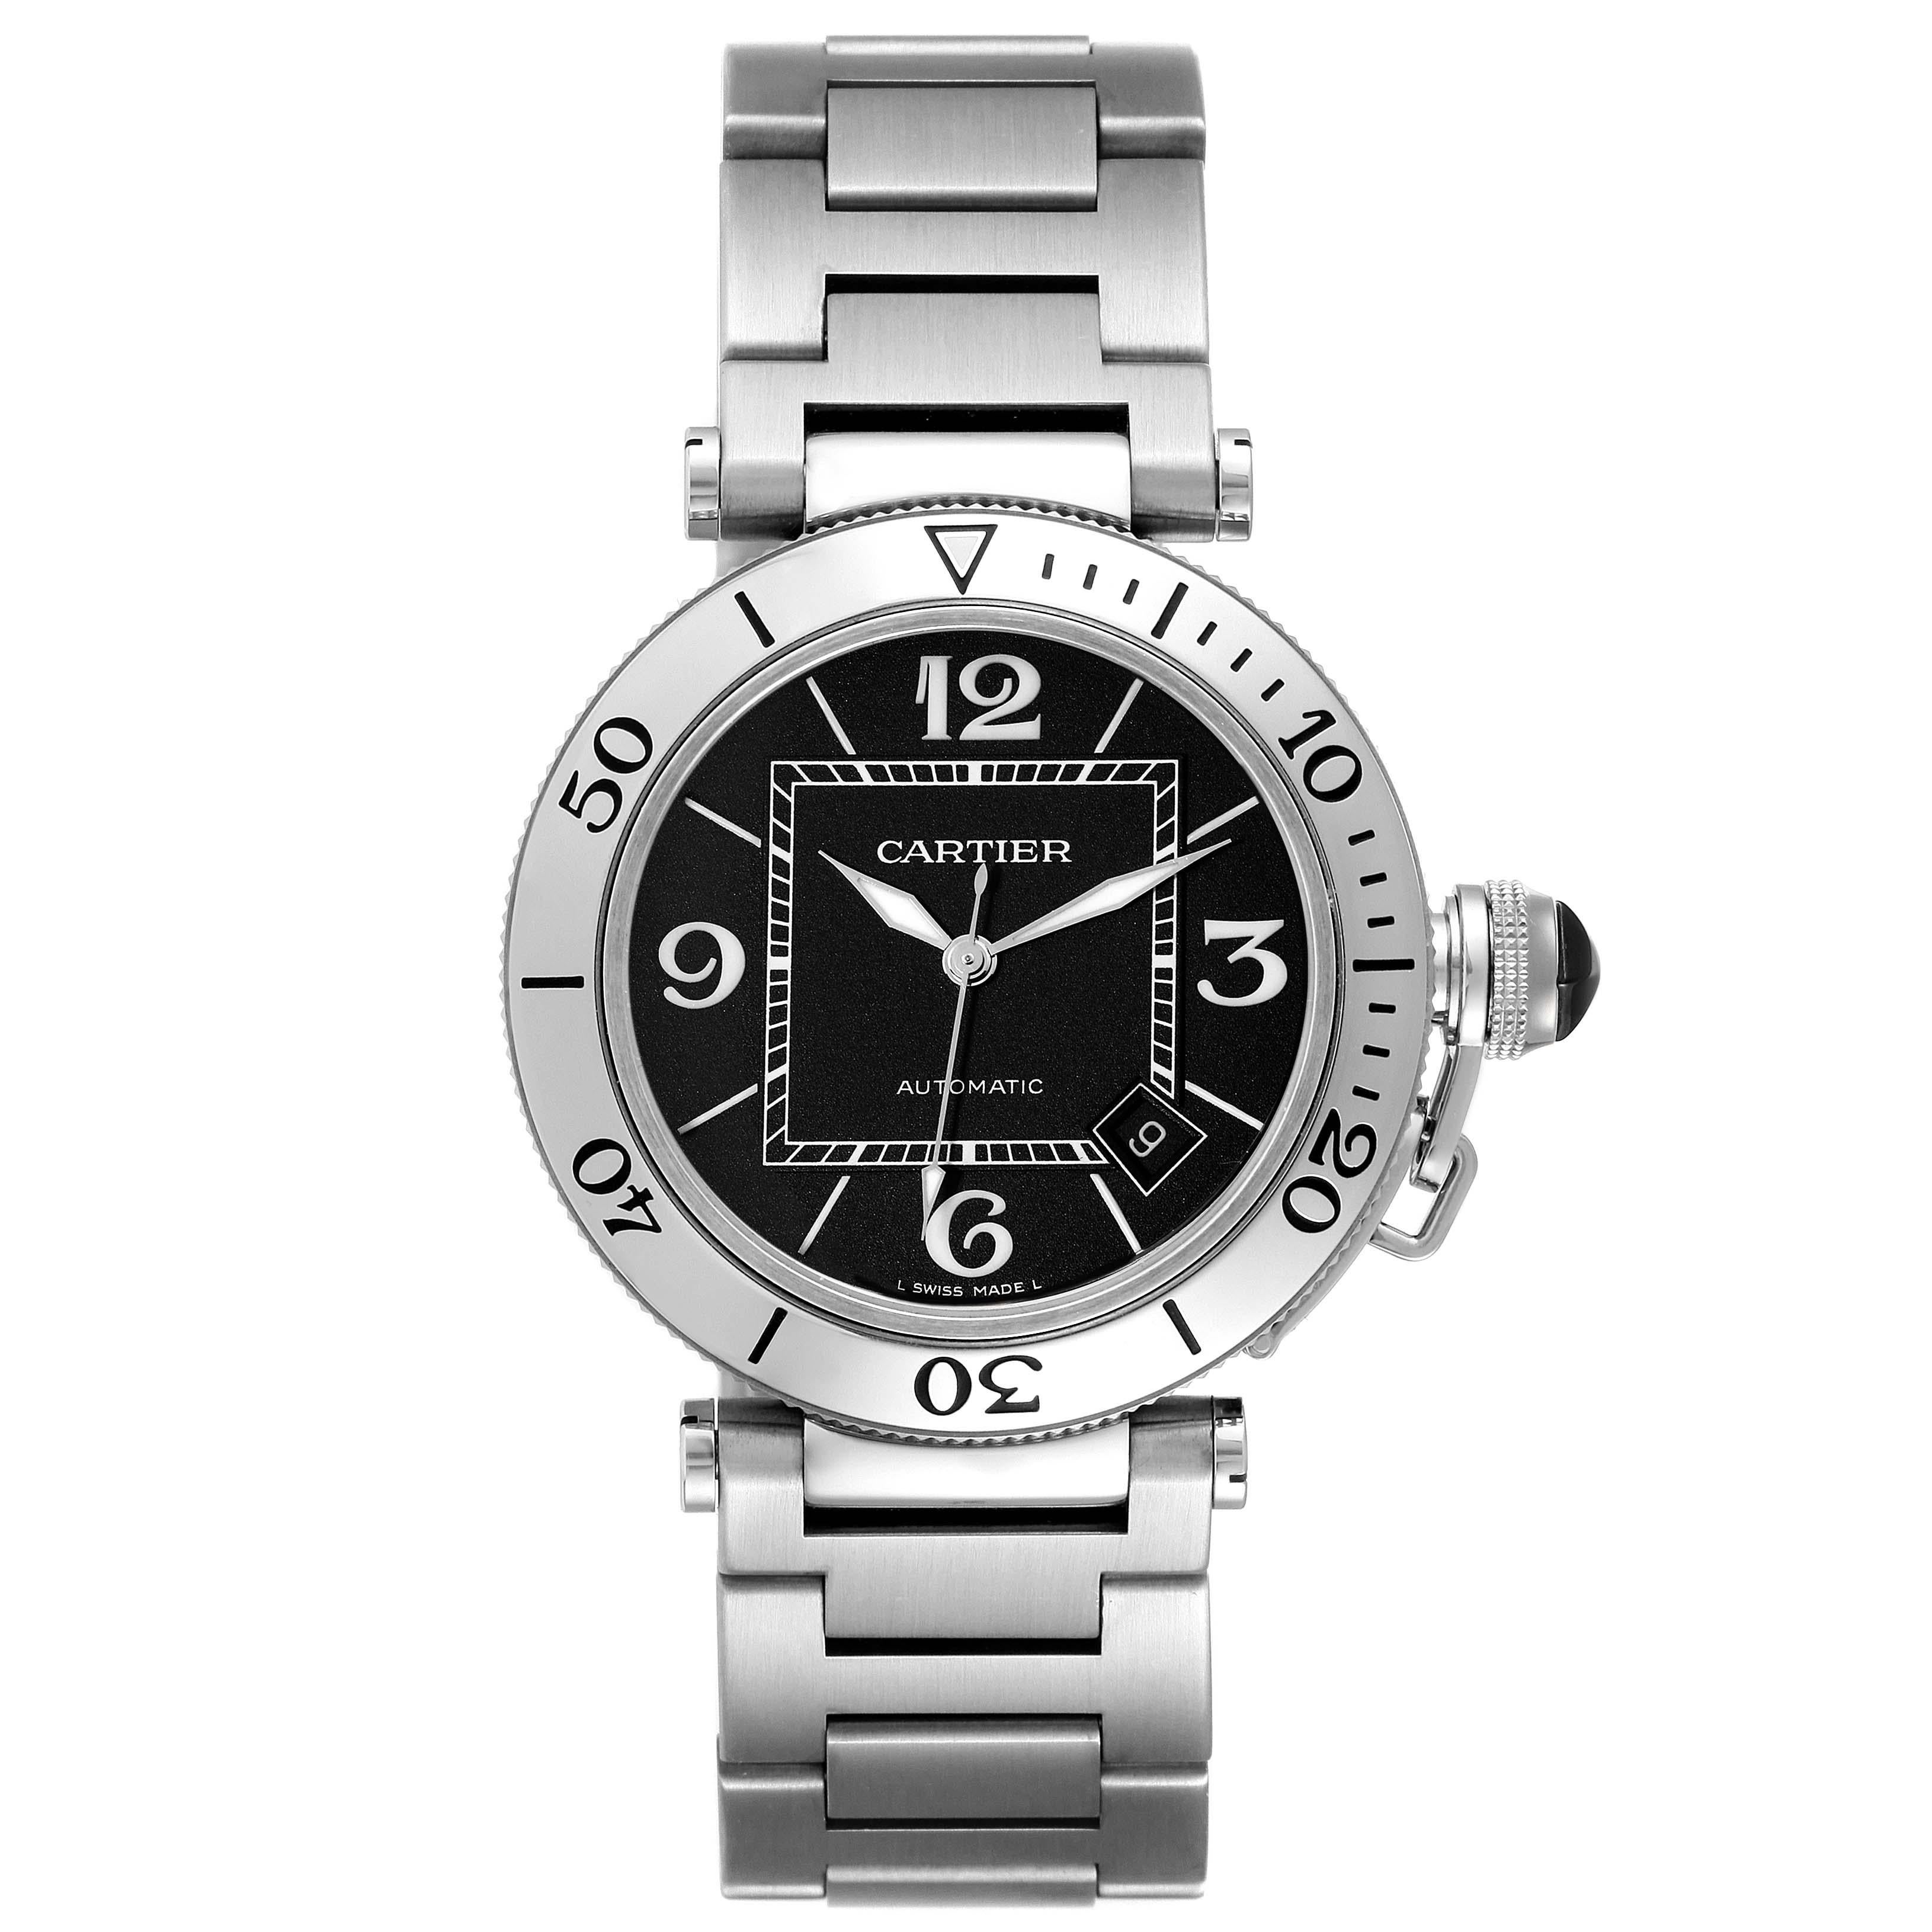 Cartier Pasha Seatimer Black Dial Automatic Steel Mens Watch W31077M7. Automatic self-winding movement. Caliber 049. Round stainless steel case 40.5 mm in diameter. Includes a screw down crown cover with a faceted ceramic cabochon. Unidirectional